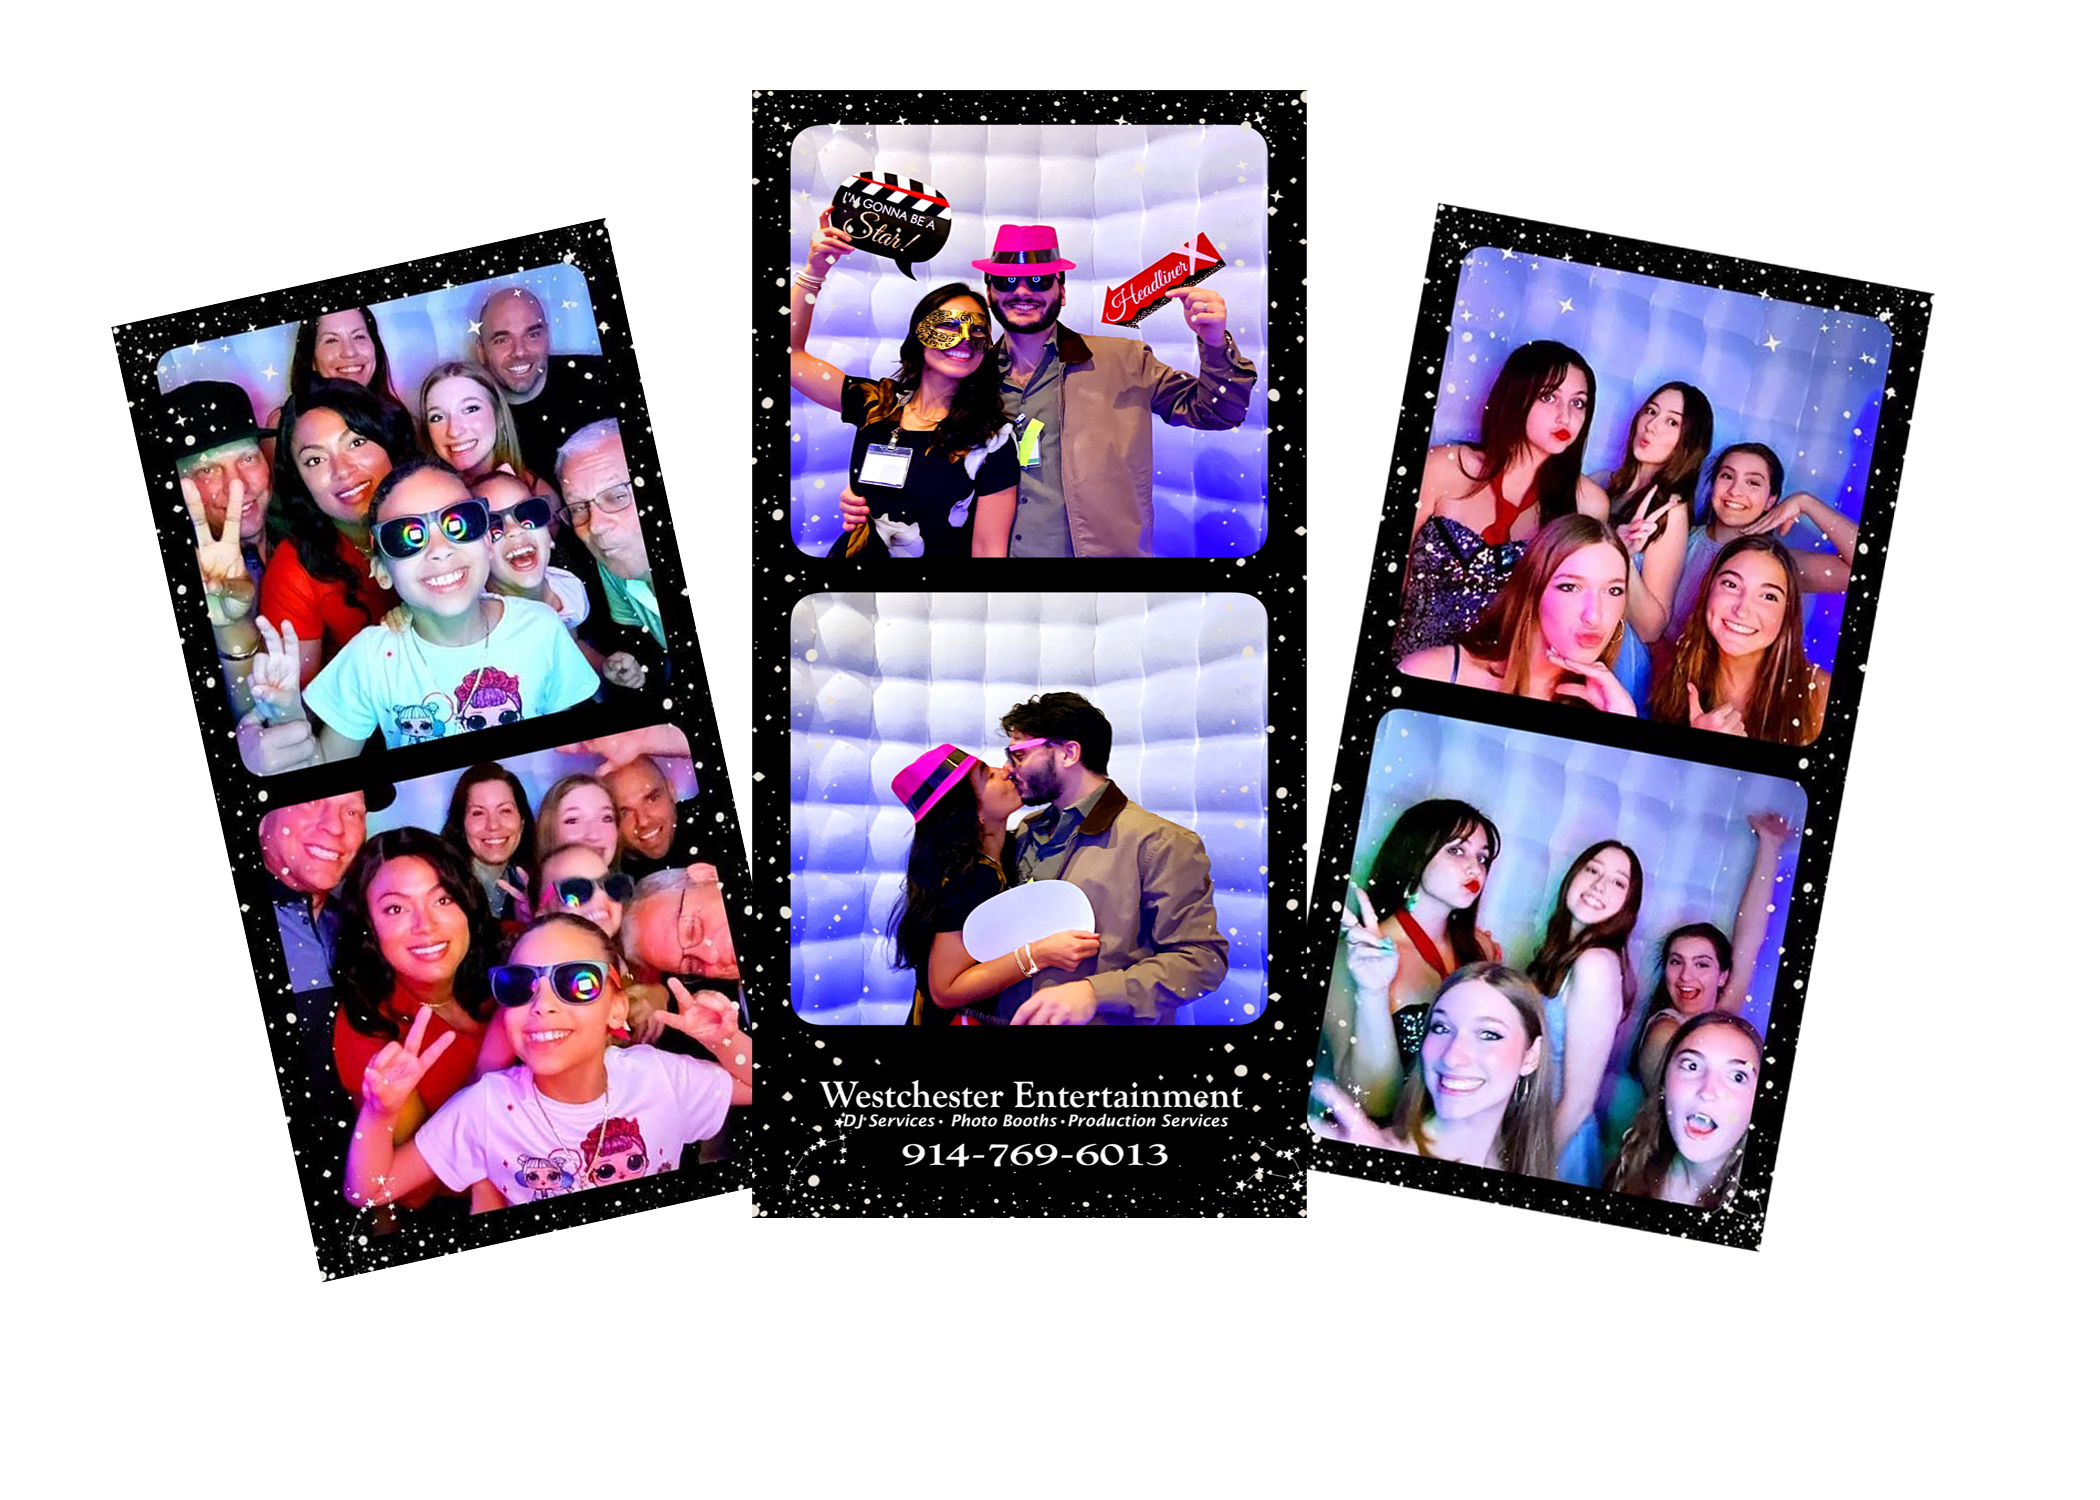 Click here to view more information about our photo booth packages for Weddings, Schools, Holiday Parties, Corporate events and more in Brookfield CT, Danbury